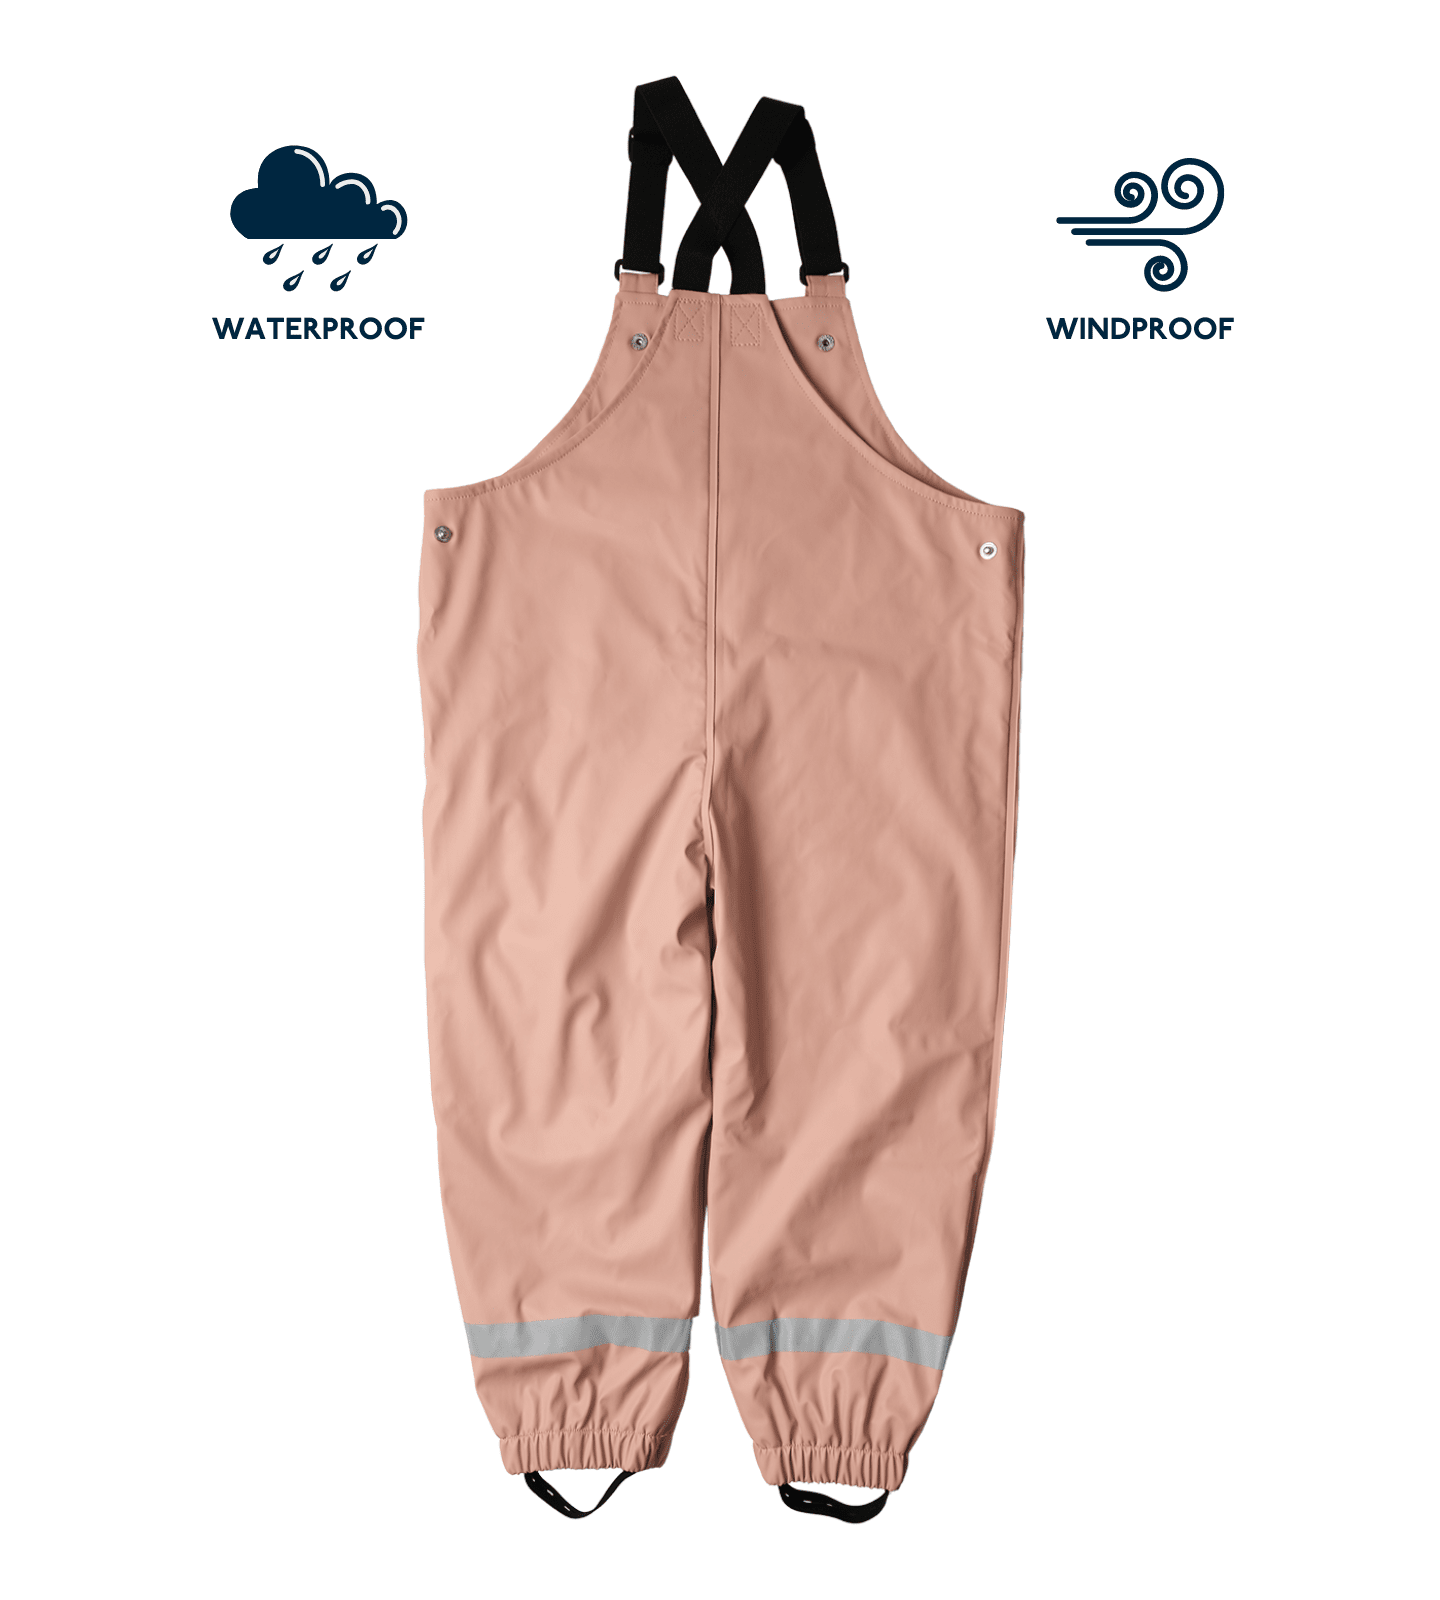 Waterproof Overalls - Brolly Sheets NZ blush